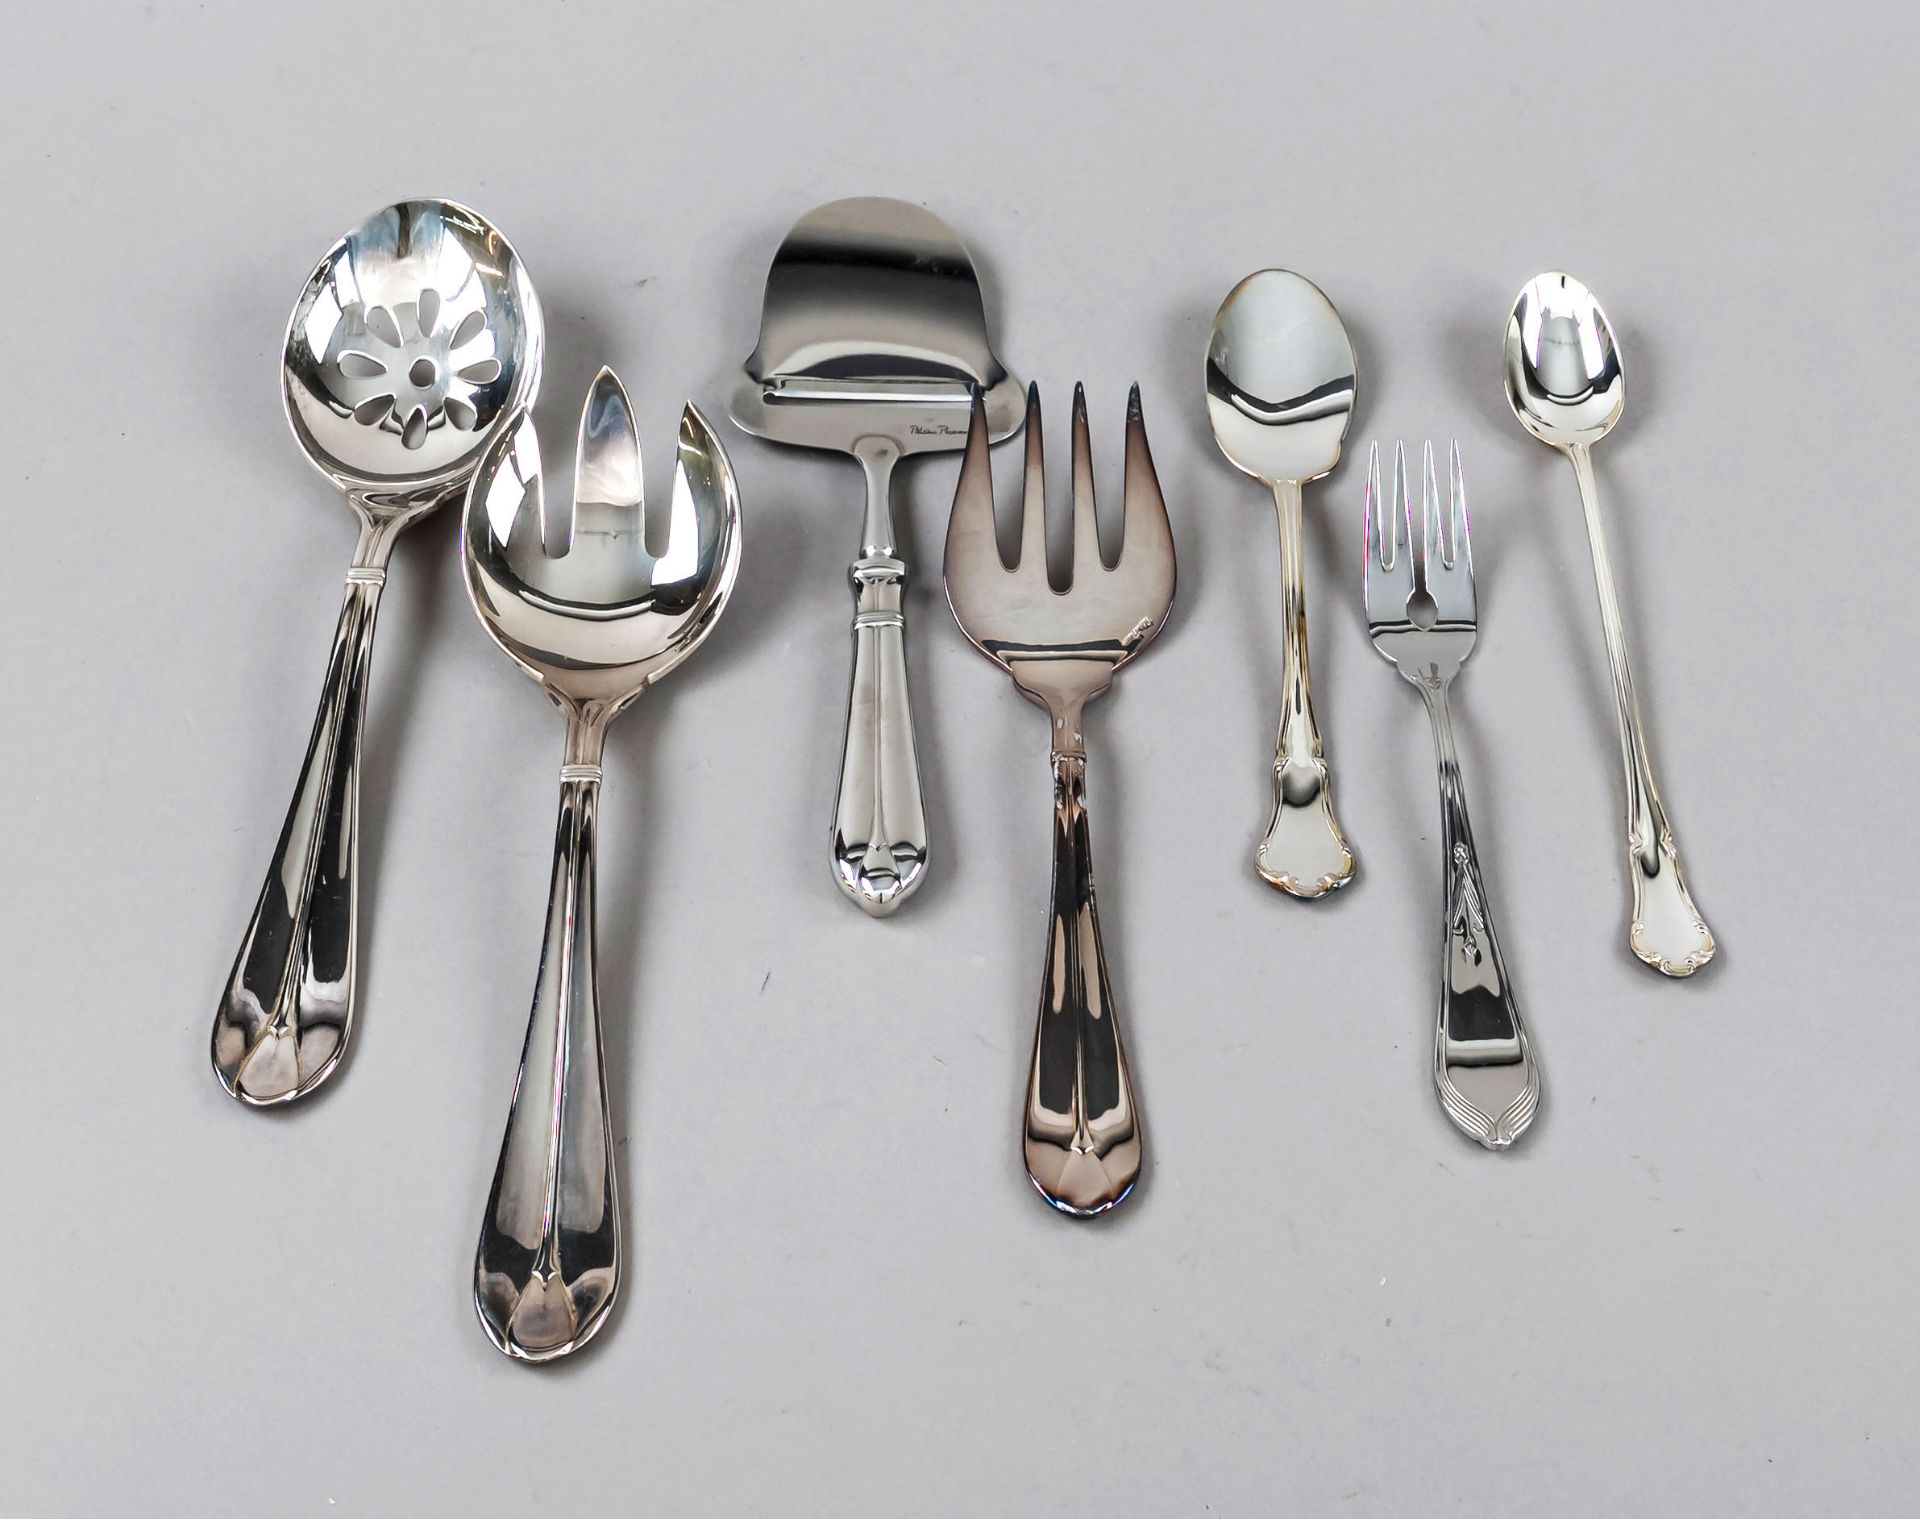 20 pieces of cutlery, German, 2nd half of 20th century, Villeroy & Boch, plated/stainless steel,